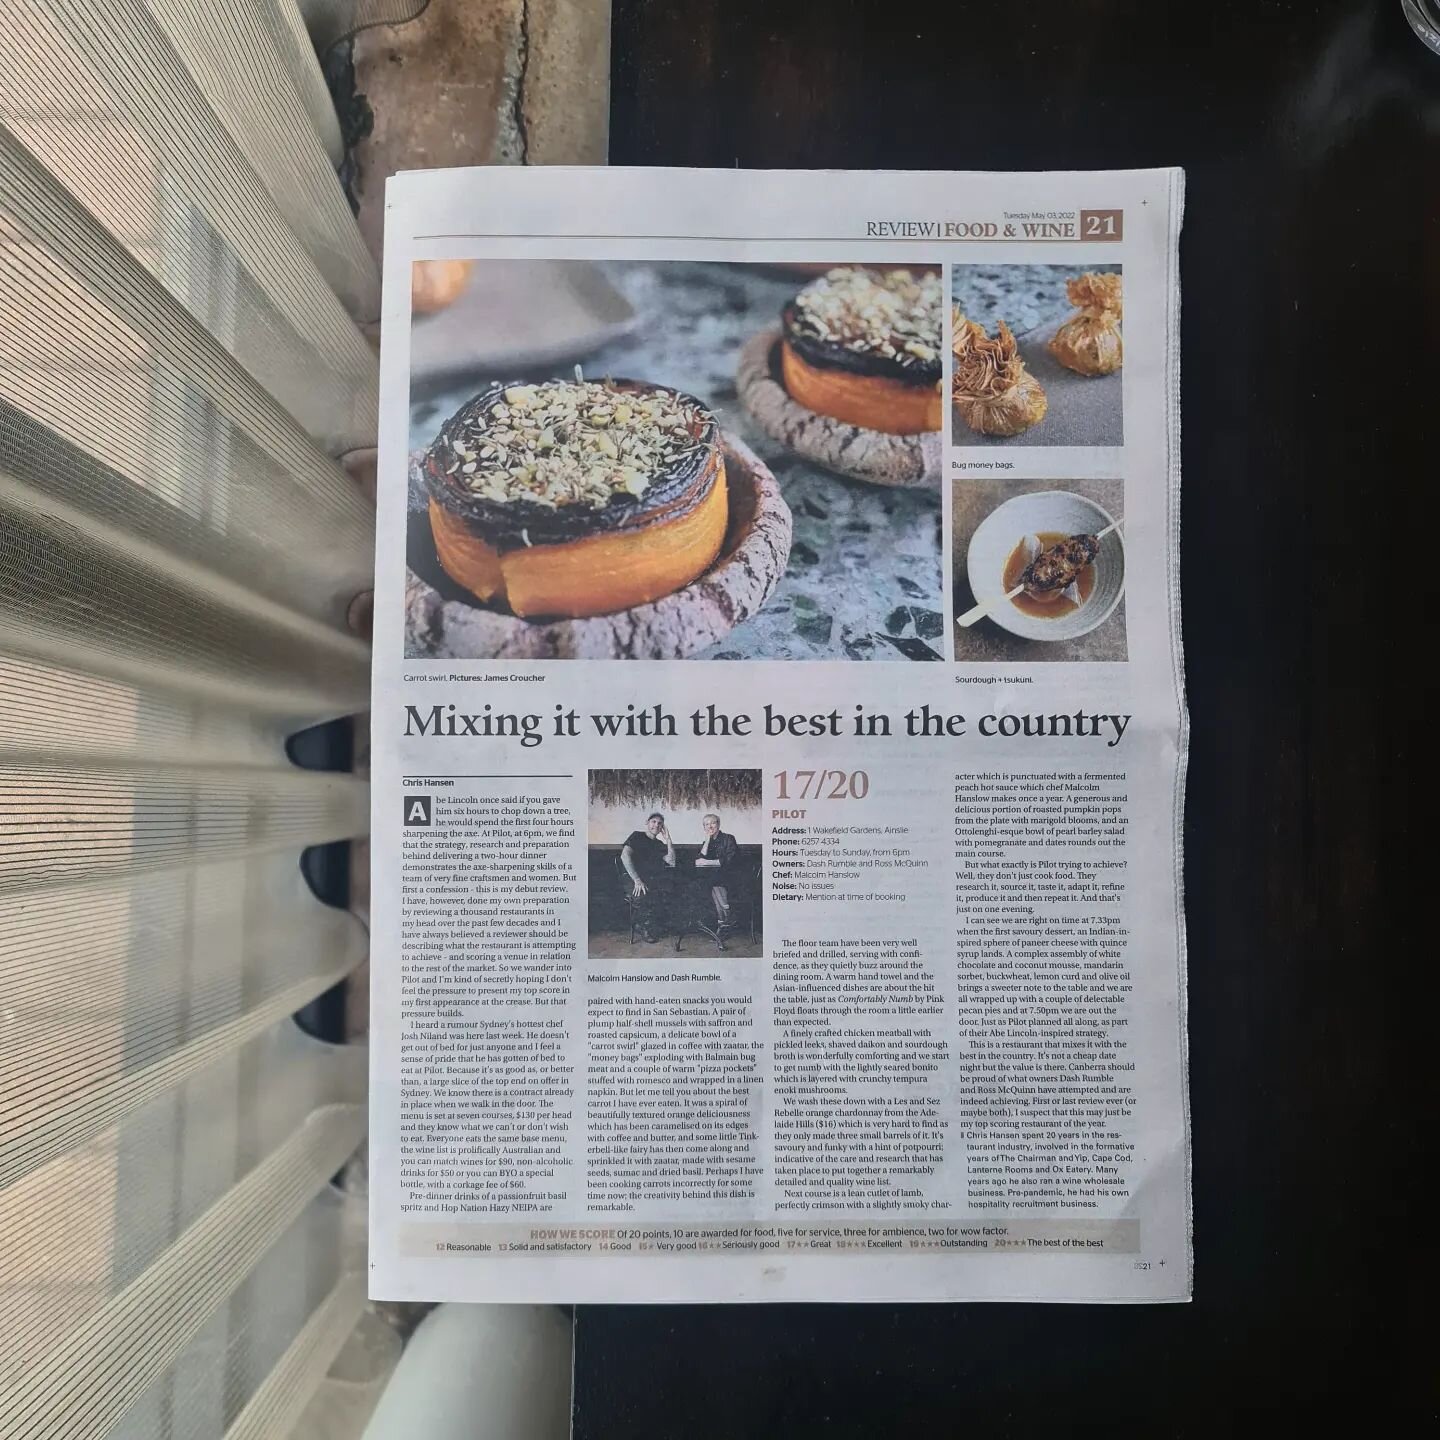 A huge thanks to our team, Chris Hansen @canberratimes for this review last Tuesday.

We are very proud of what we have achieved so far together, and humbled that this little restaurant can make people happy and full.

#carrotswirlsforeveryone